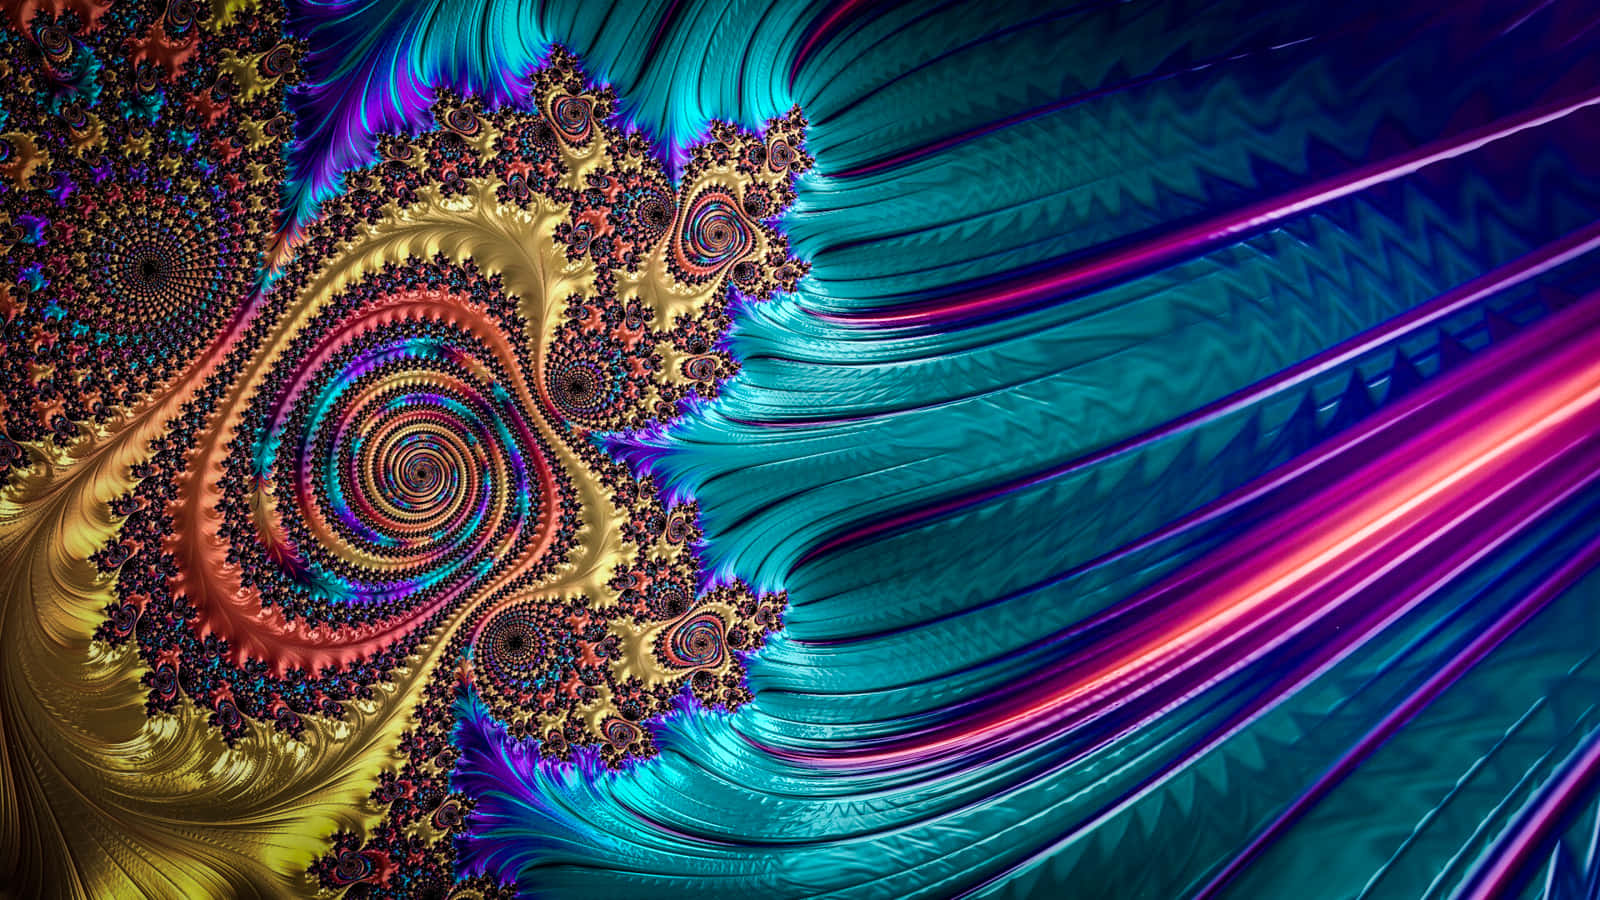 Geometric shapes unfold in endlessly fascinating patterns with Fractal art